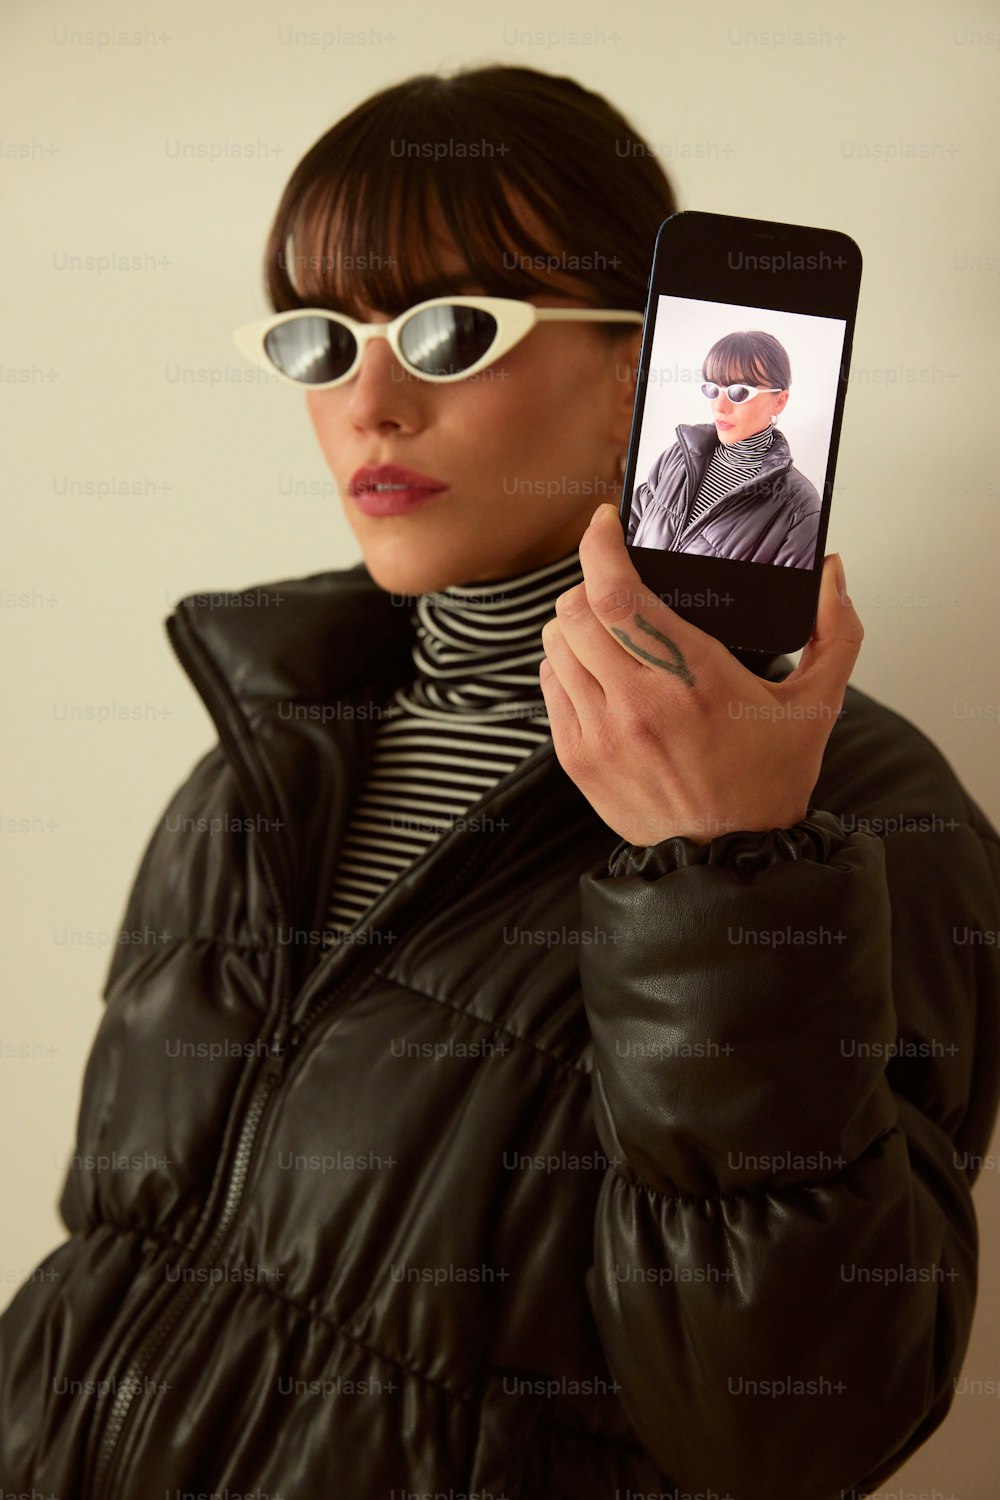 a woman wearing sunglasses holding up a cell phone